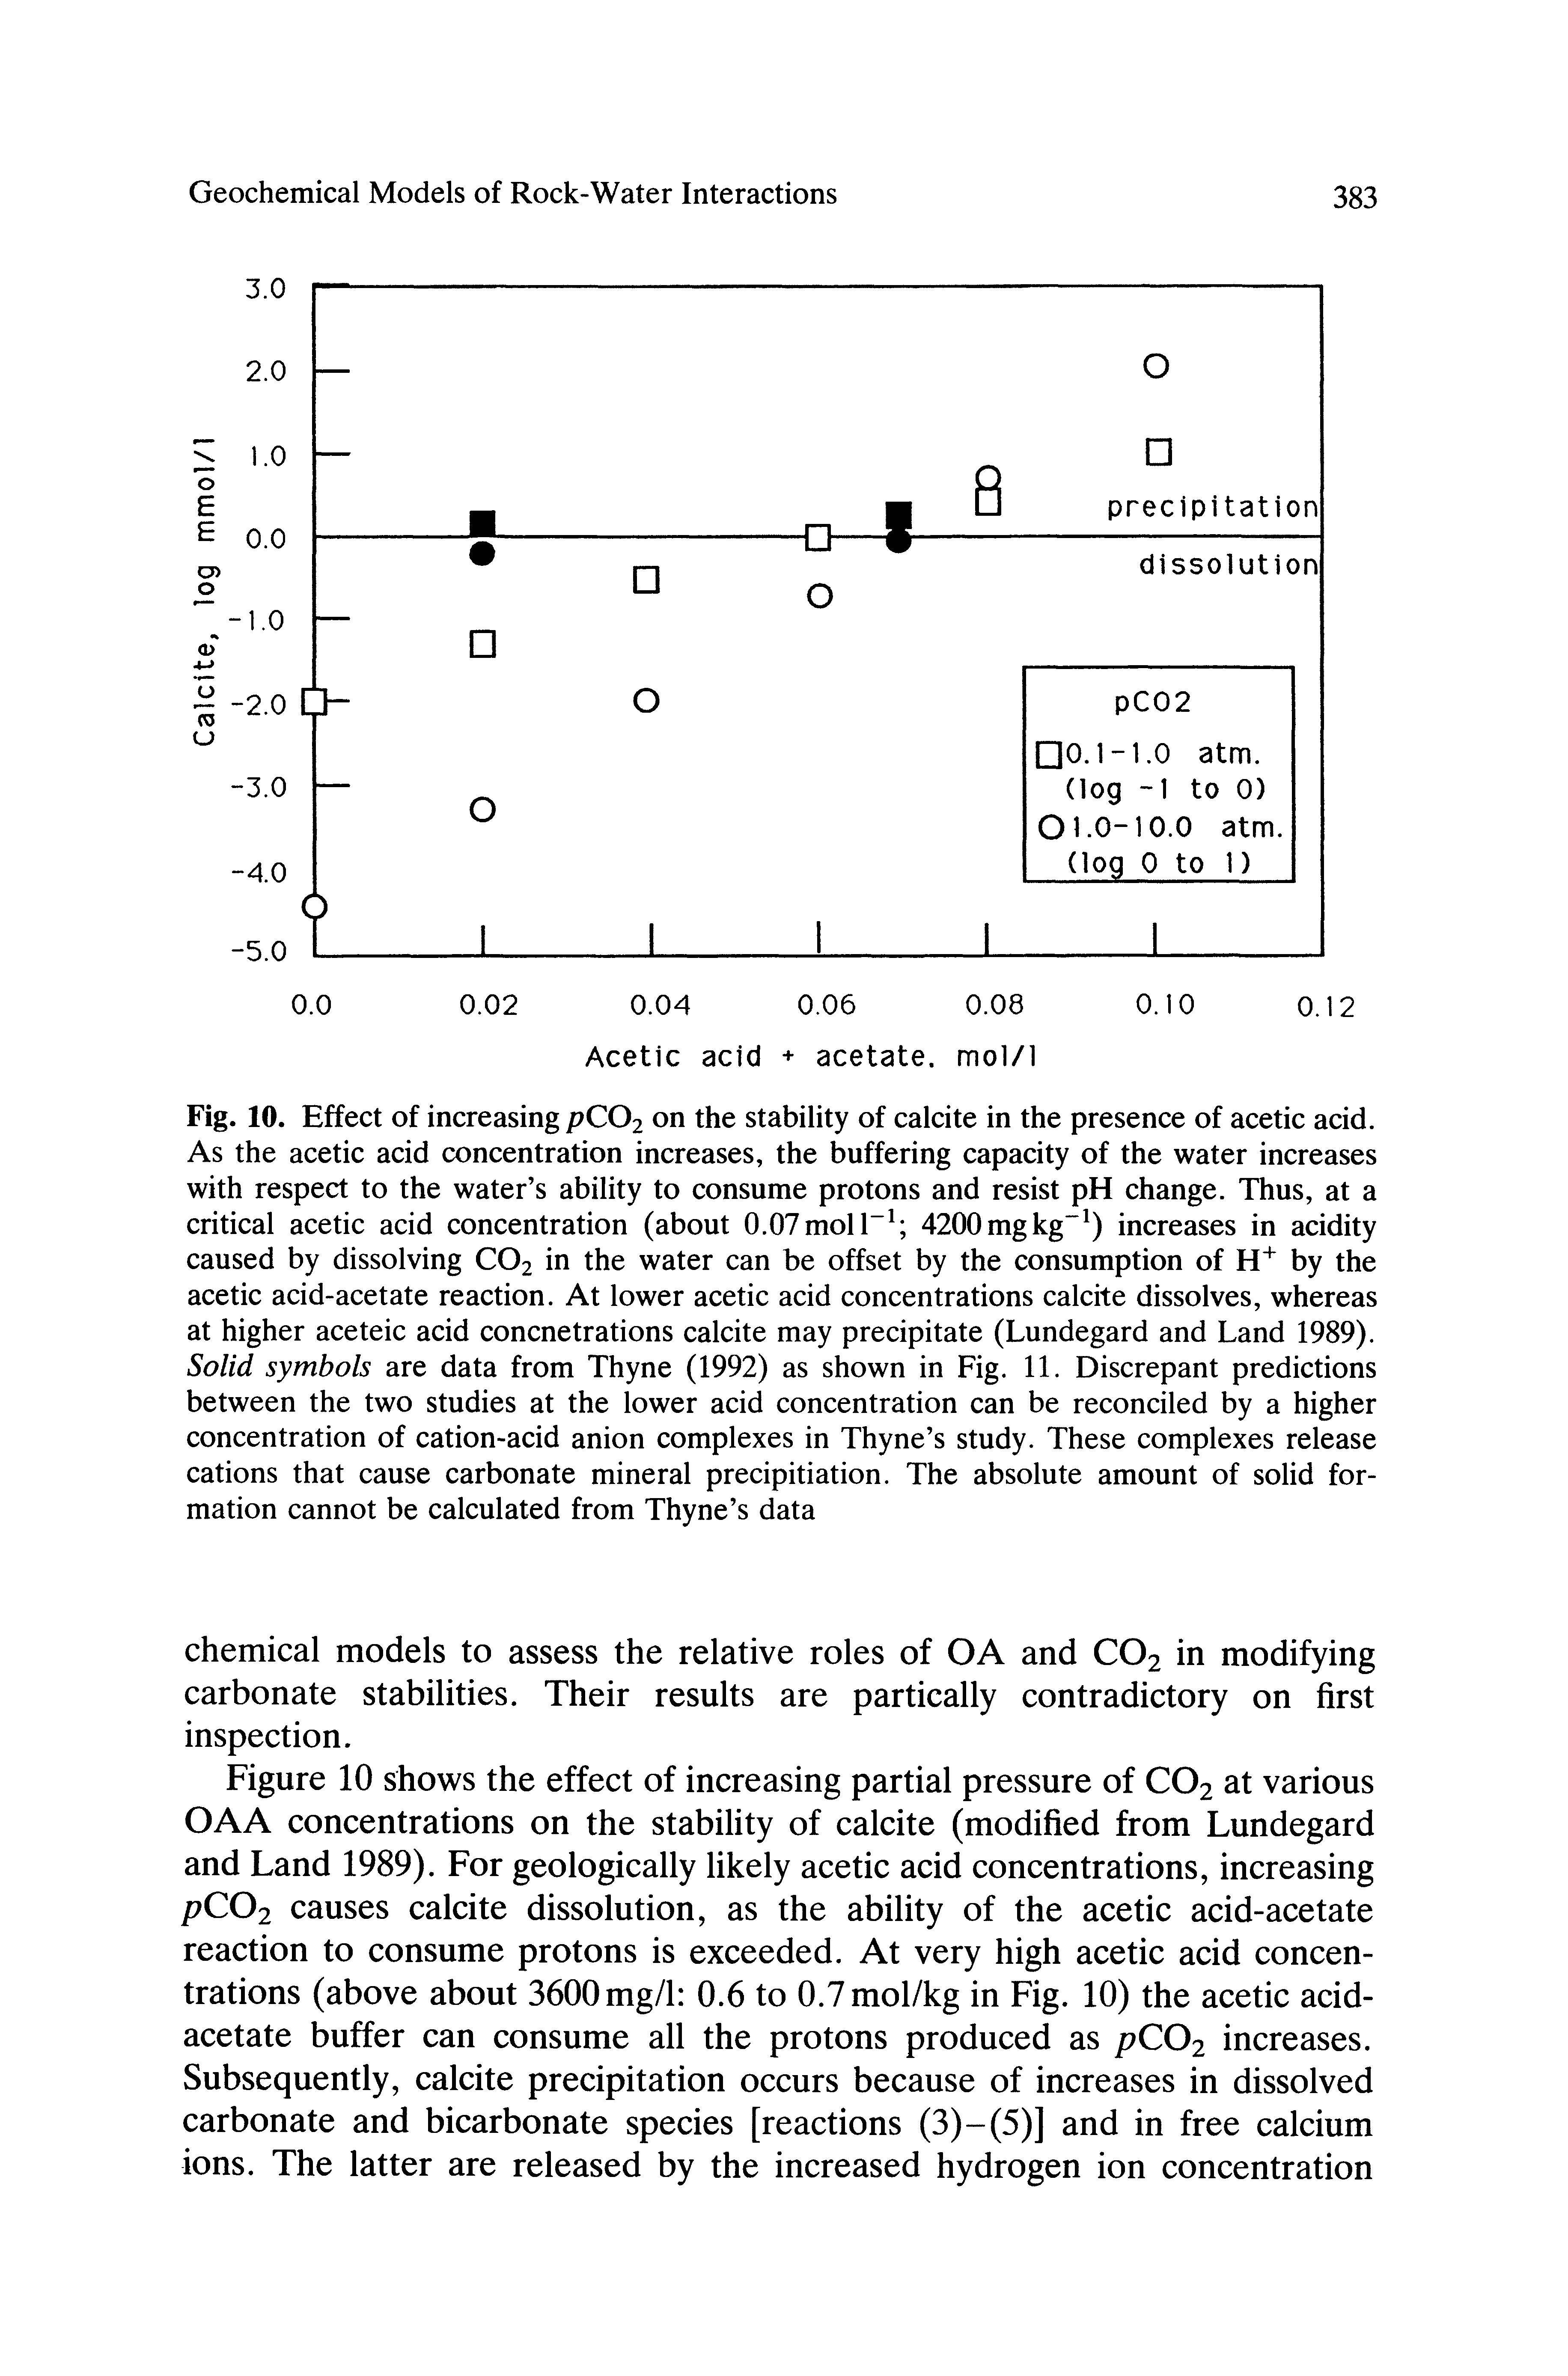 Fig. 10. Effect of increasing pC02 on the stability of calcite in the presence of acetic acid. As the acetic acid concentration increases, the buffering capacity of the water increases with respect to the water s ability to consume protons and resist pH change. Thus, at a critical acetic acid concentration (about 0.07 mol 1 4200mgkg ) increases in acidity caused by dissolving CO2 in the water can be offset by the consumption of by the acetic acid-acetate reaction. At lower acetic acid concentrations calcite dissolves, whereas at higher aceteic acid concnetrations calcite may precipitate (Lundegard and Land 1989). Solid symbols are data from Thyne (1992) as shown in Fig. 11. Discrepant predictions between the two studies at the lower acid concentration can be reconciled by a higher concentration of cation-acid anion complexes in Thyne s study. These complexes release cations that cause carbonate mineral precipitiation. The absolute amount of solid formation cannot be calculated from Thyne s data...